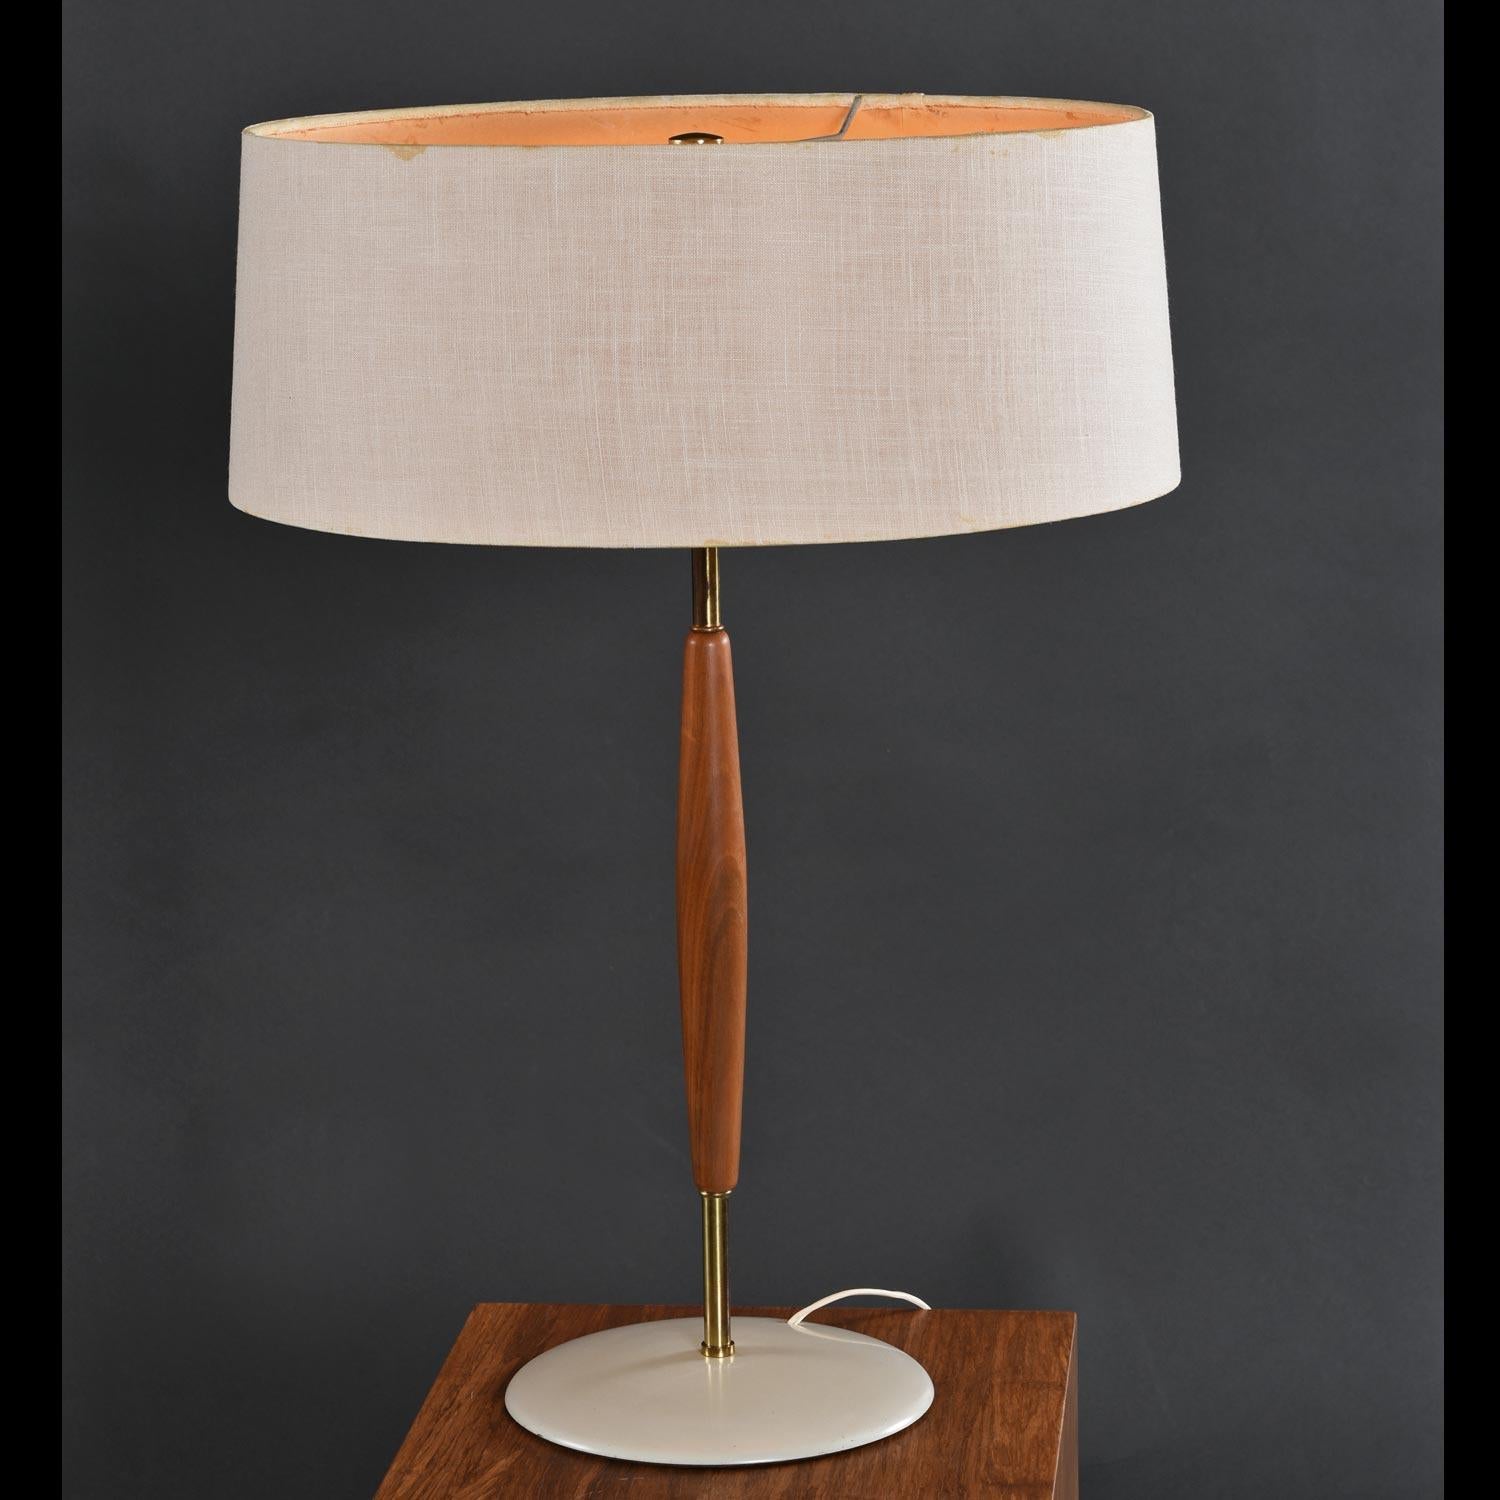 Vintage 1950s table lamp by Gerald Thurston for Lightolier. The lamp is comprised of a brass rod embellished with an elegantly tapered wood mid-section. The wood is so beautifully turned that it’s a challenge to decipher just what species it is. The